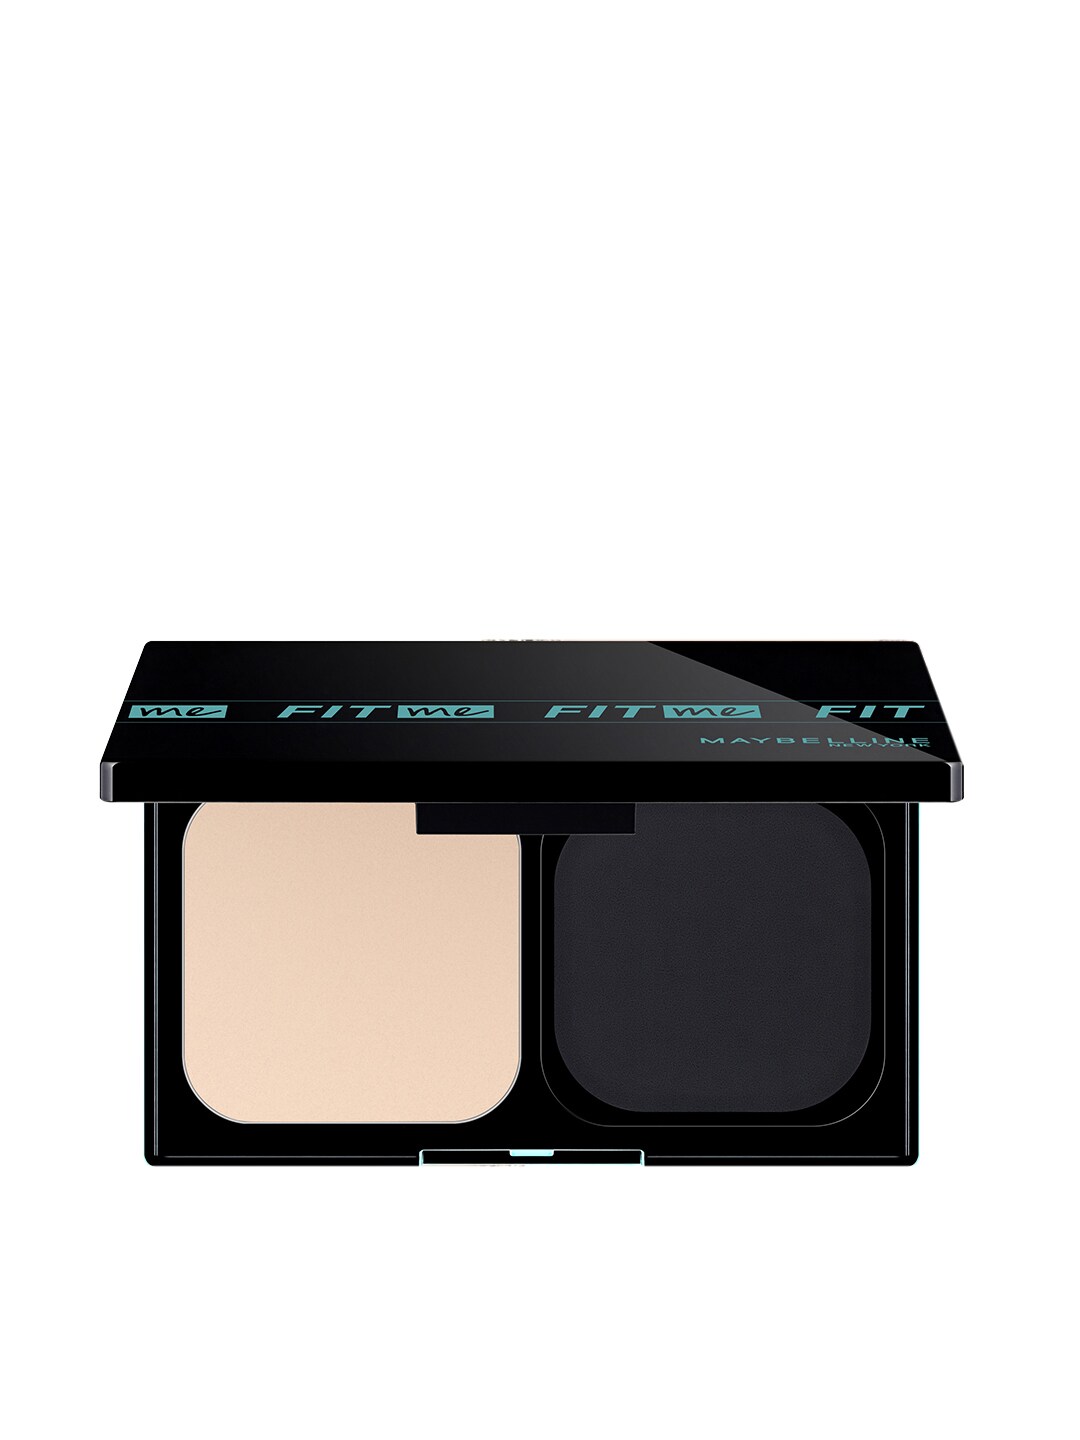 Maybelline New York Fit Me SPF 44 Ultimate Powder Foundation - Shade 120 Price in India